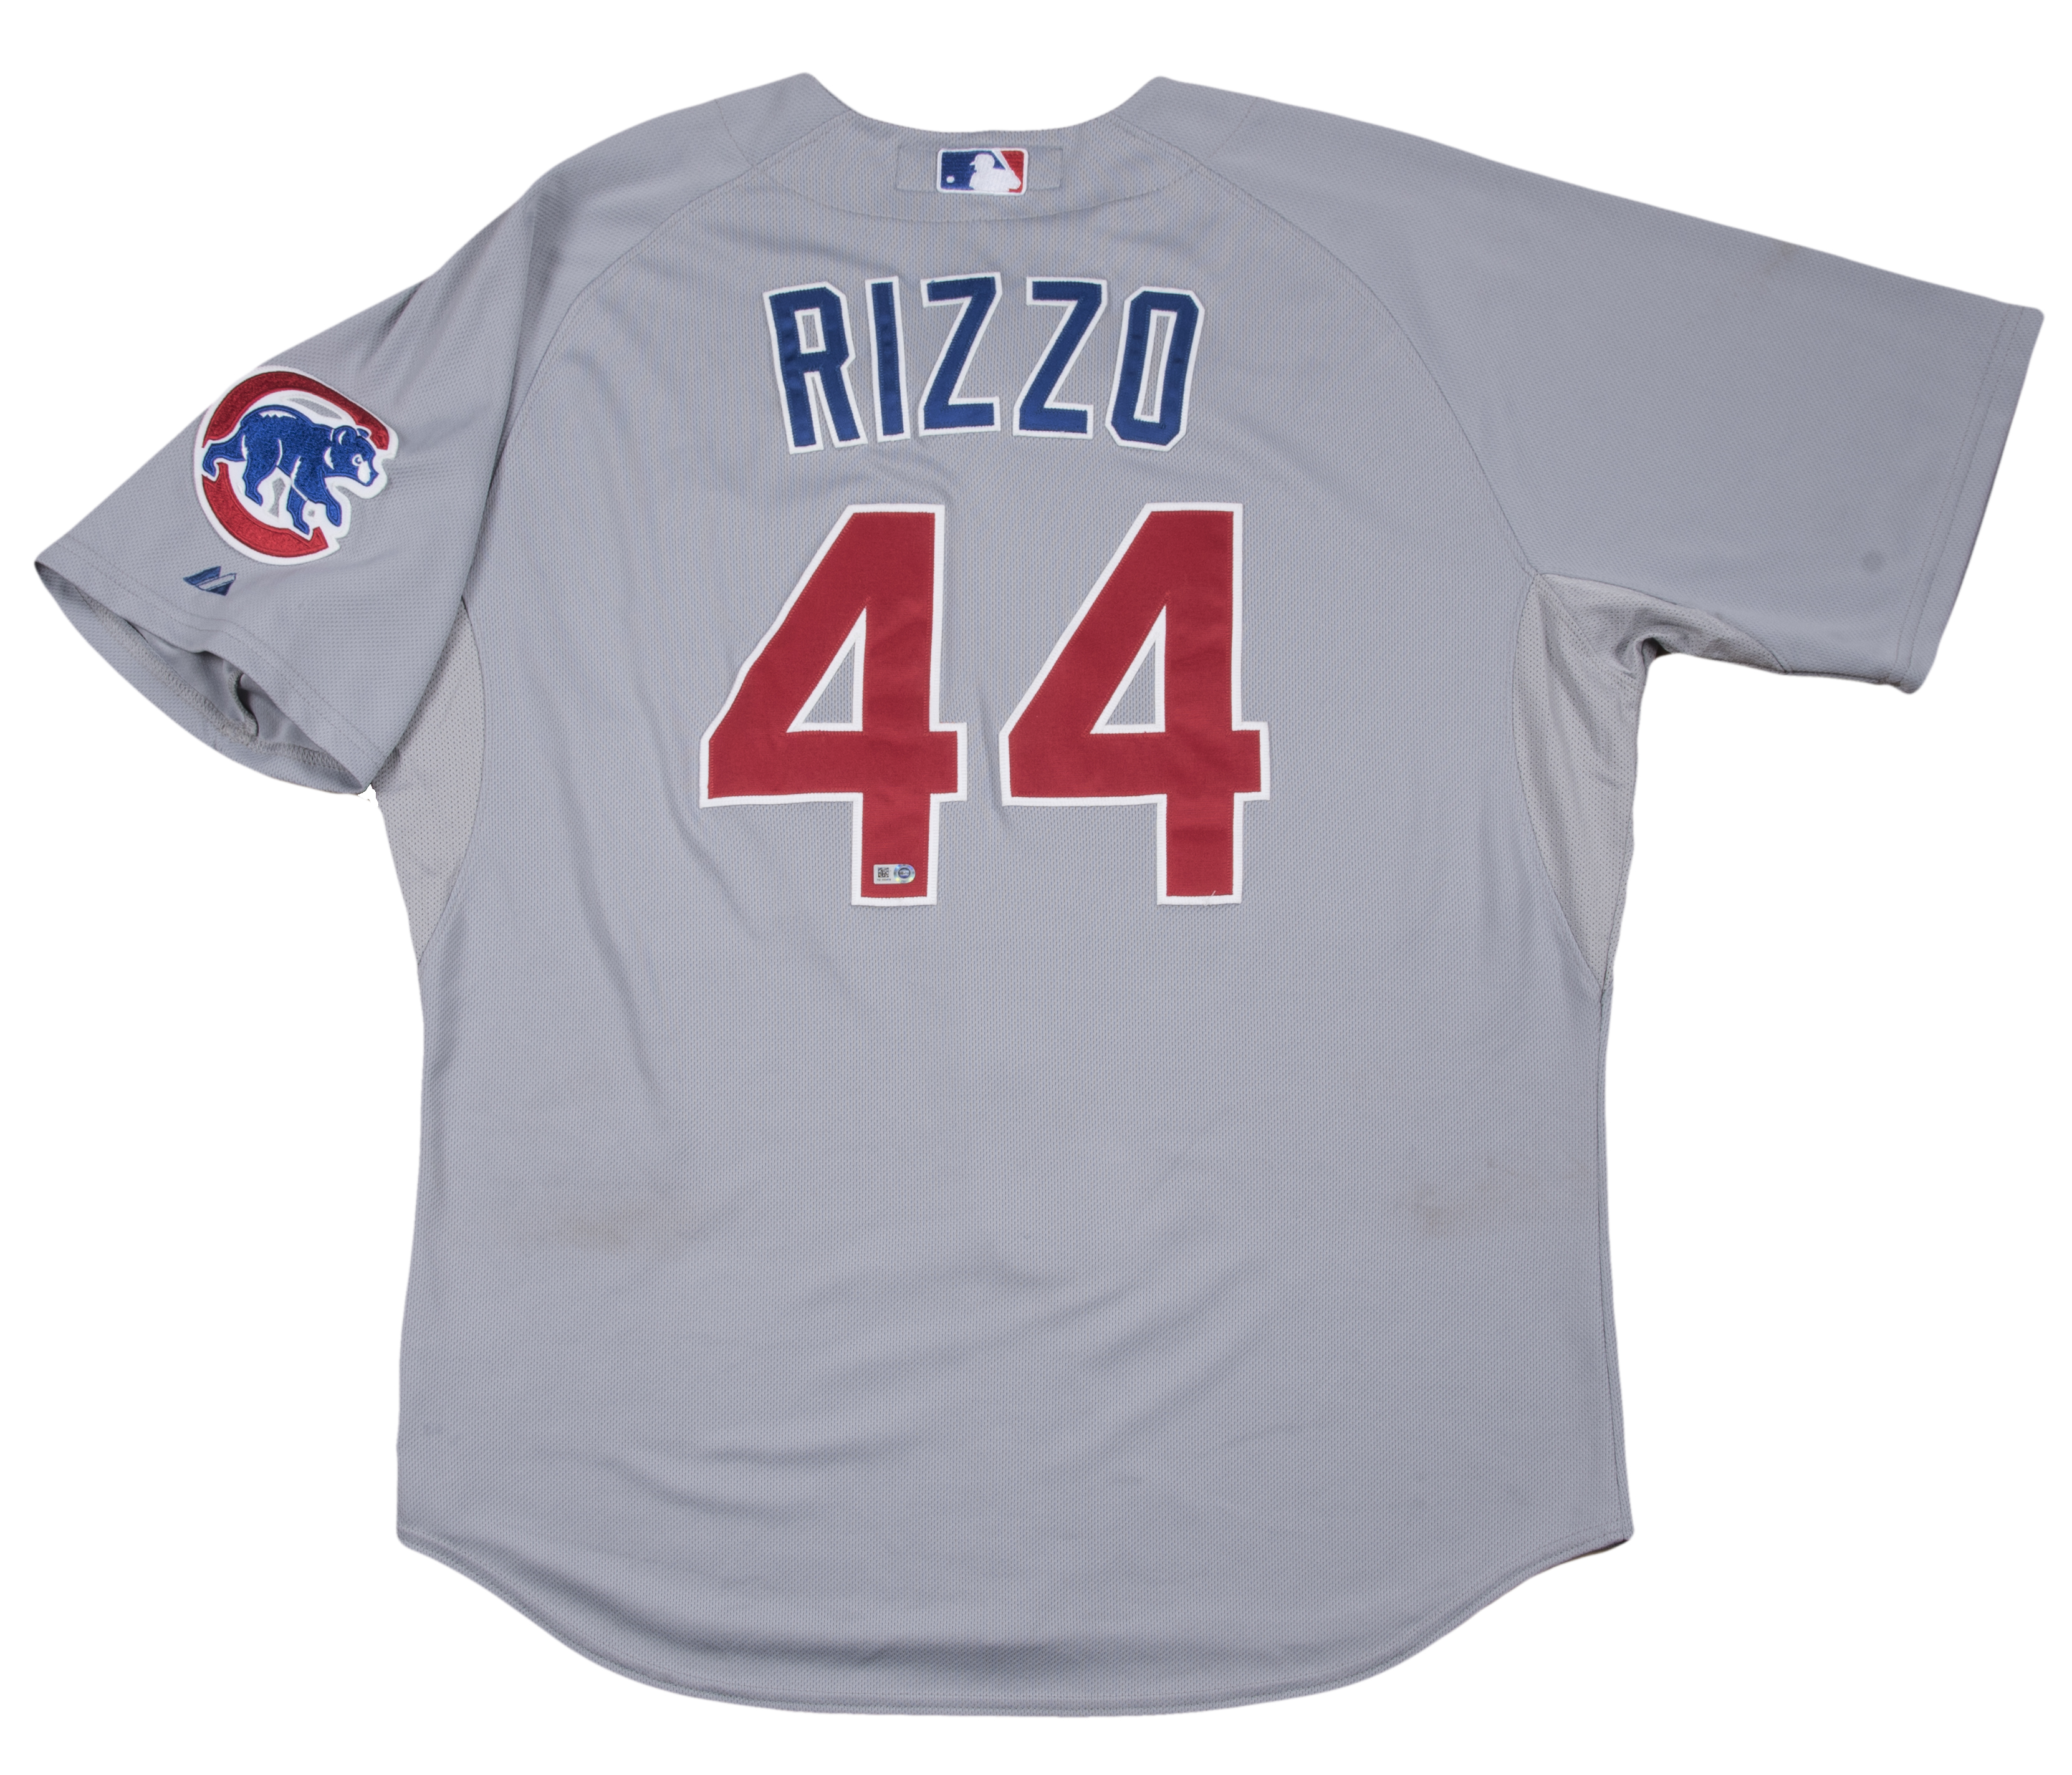 rizzo road jersey